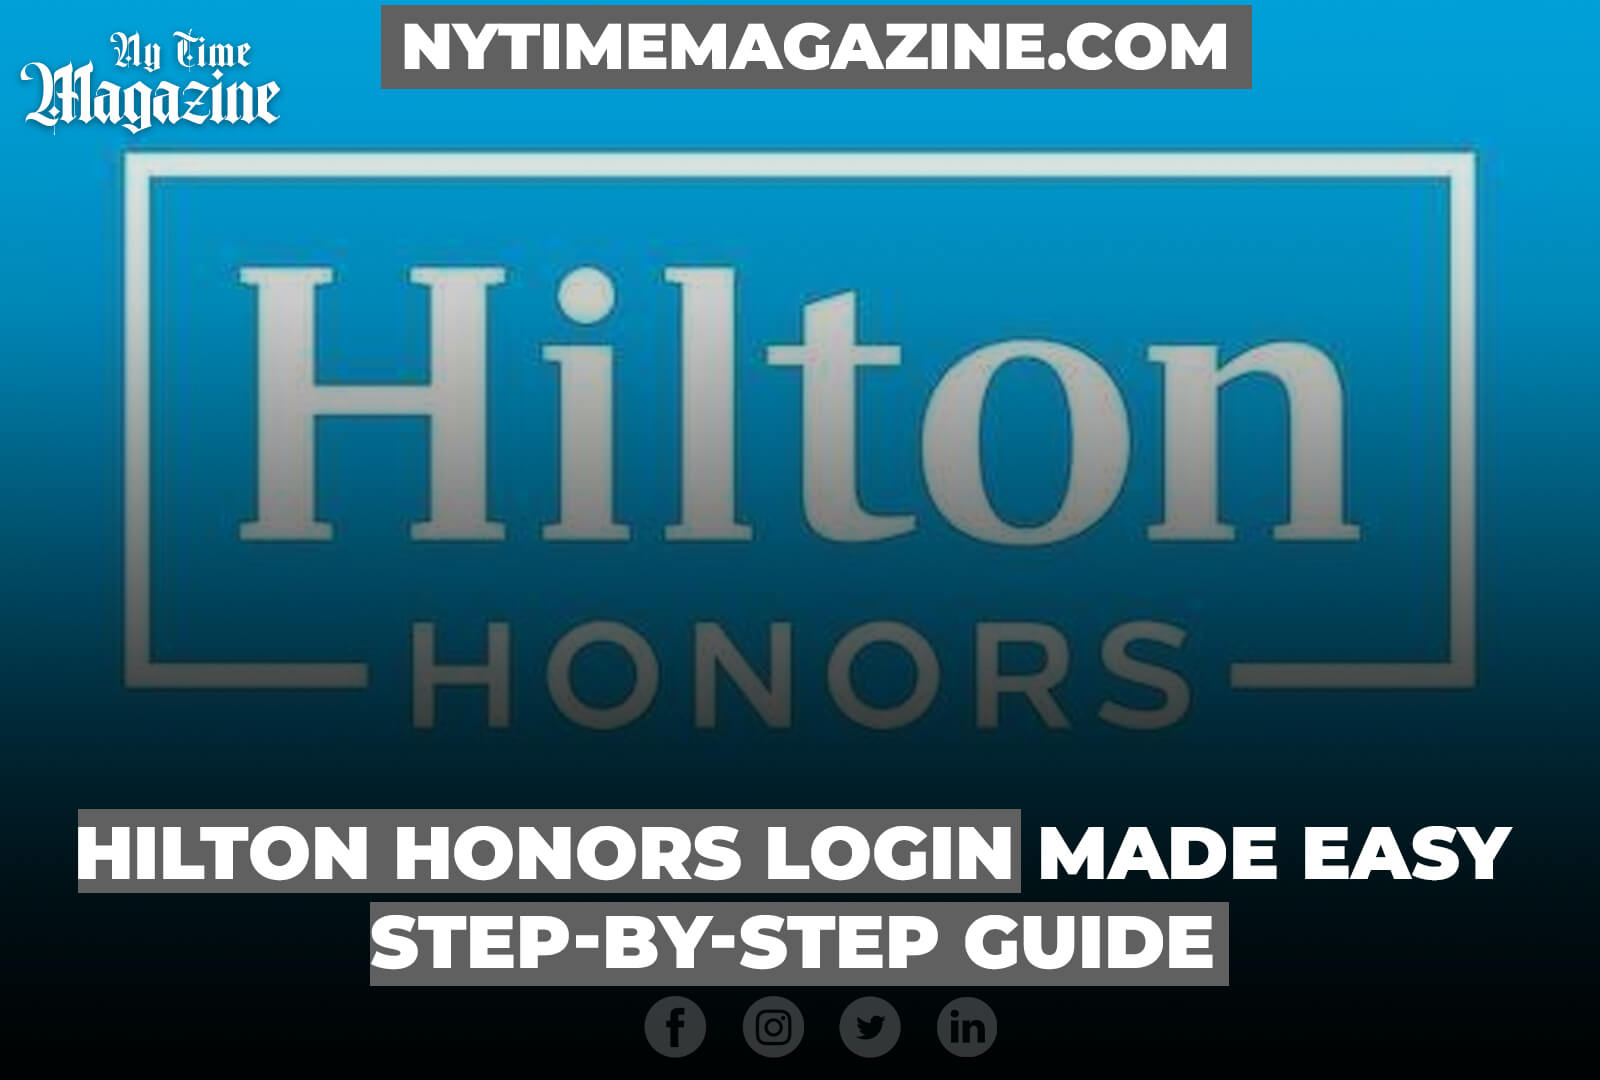 HILTON HONORS LOGIN MADE EASY: STEP-BY-STEP GUIDE